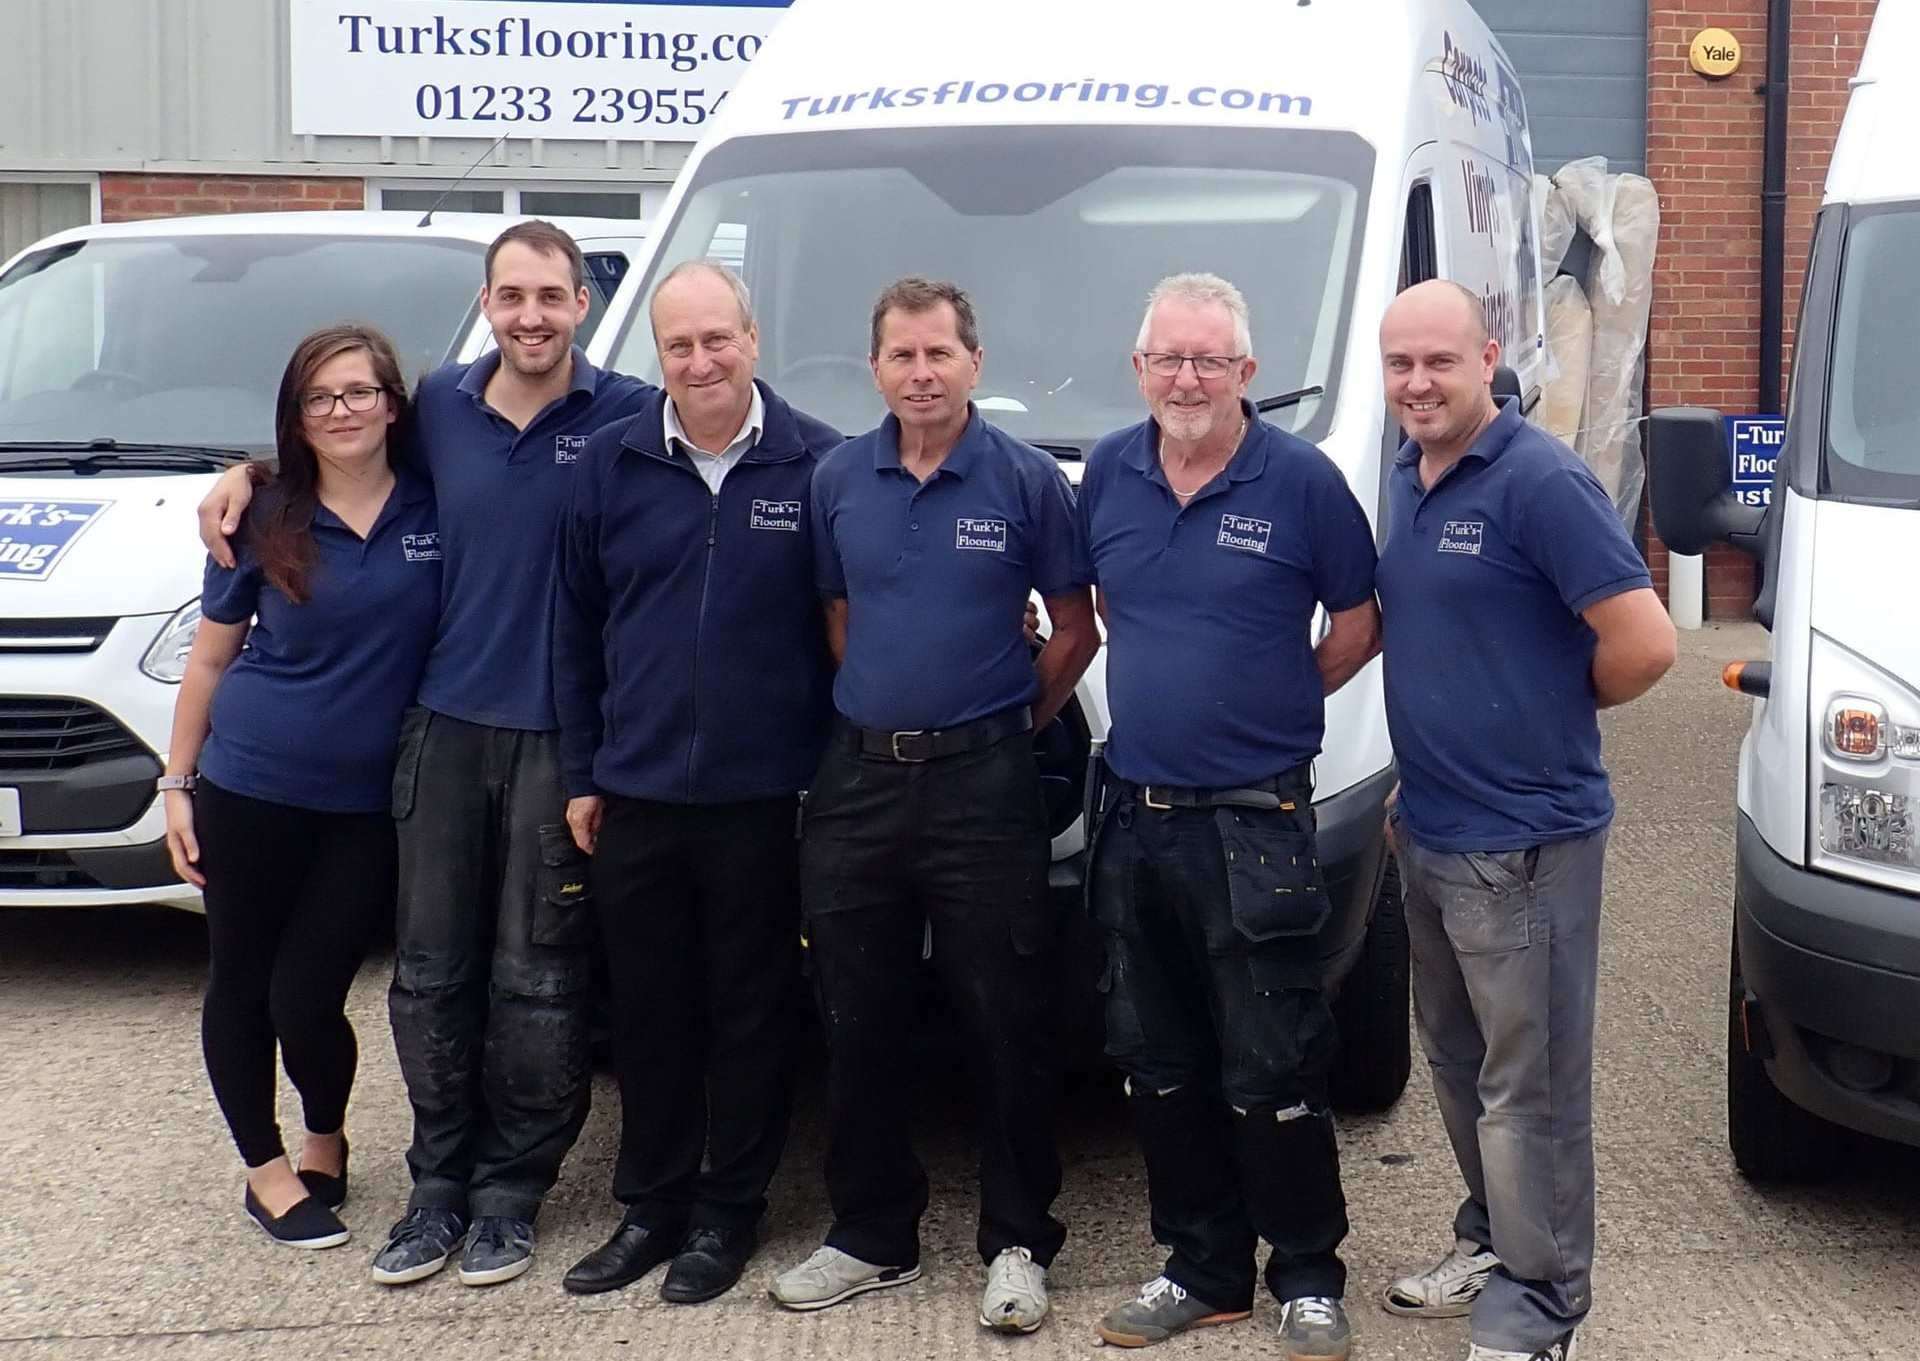 Turk's Flooring are an independent, family run business in Ashford and are on the lookout for a trainee to join their company.